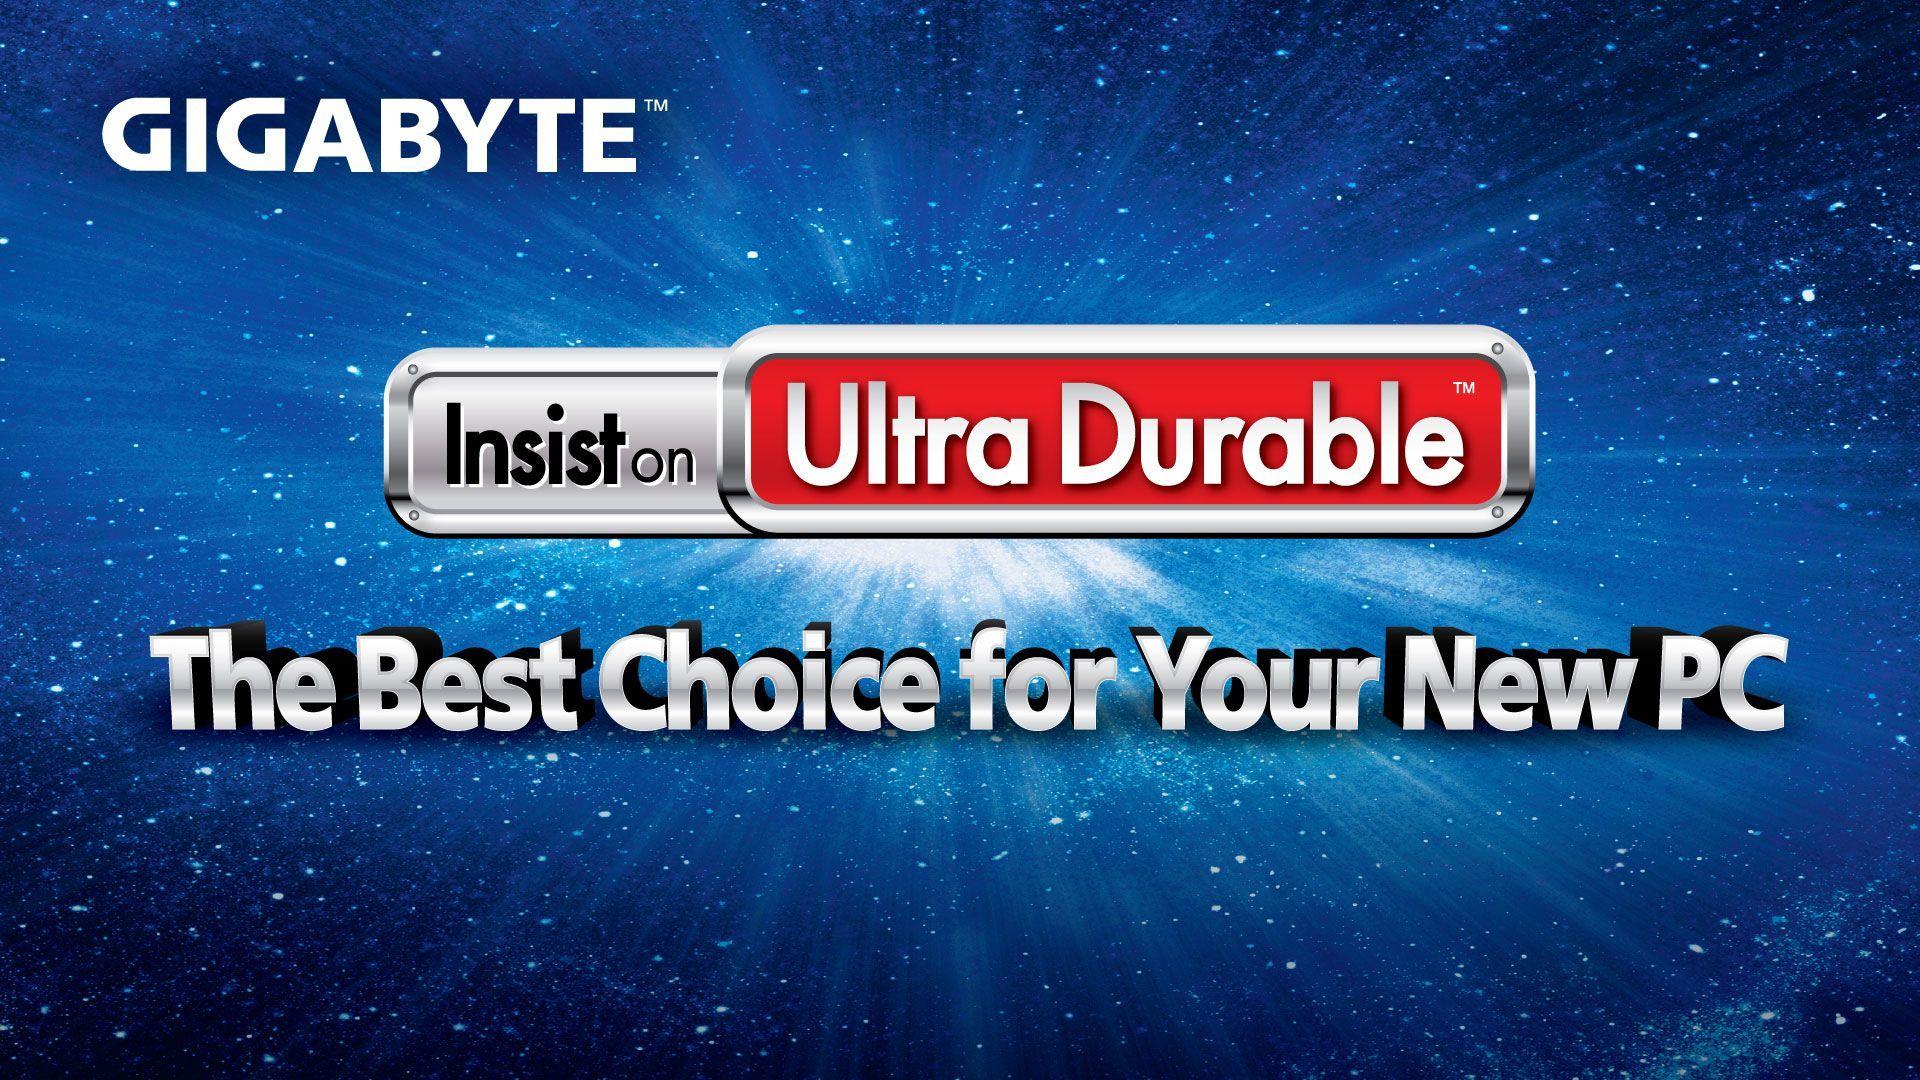 GIGABYTE 7 series Ultra Durable Motherboards